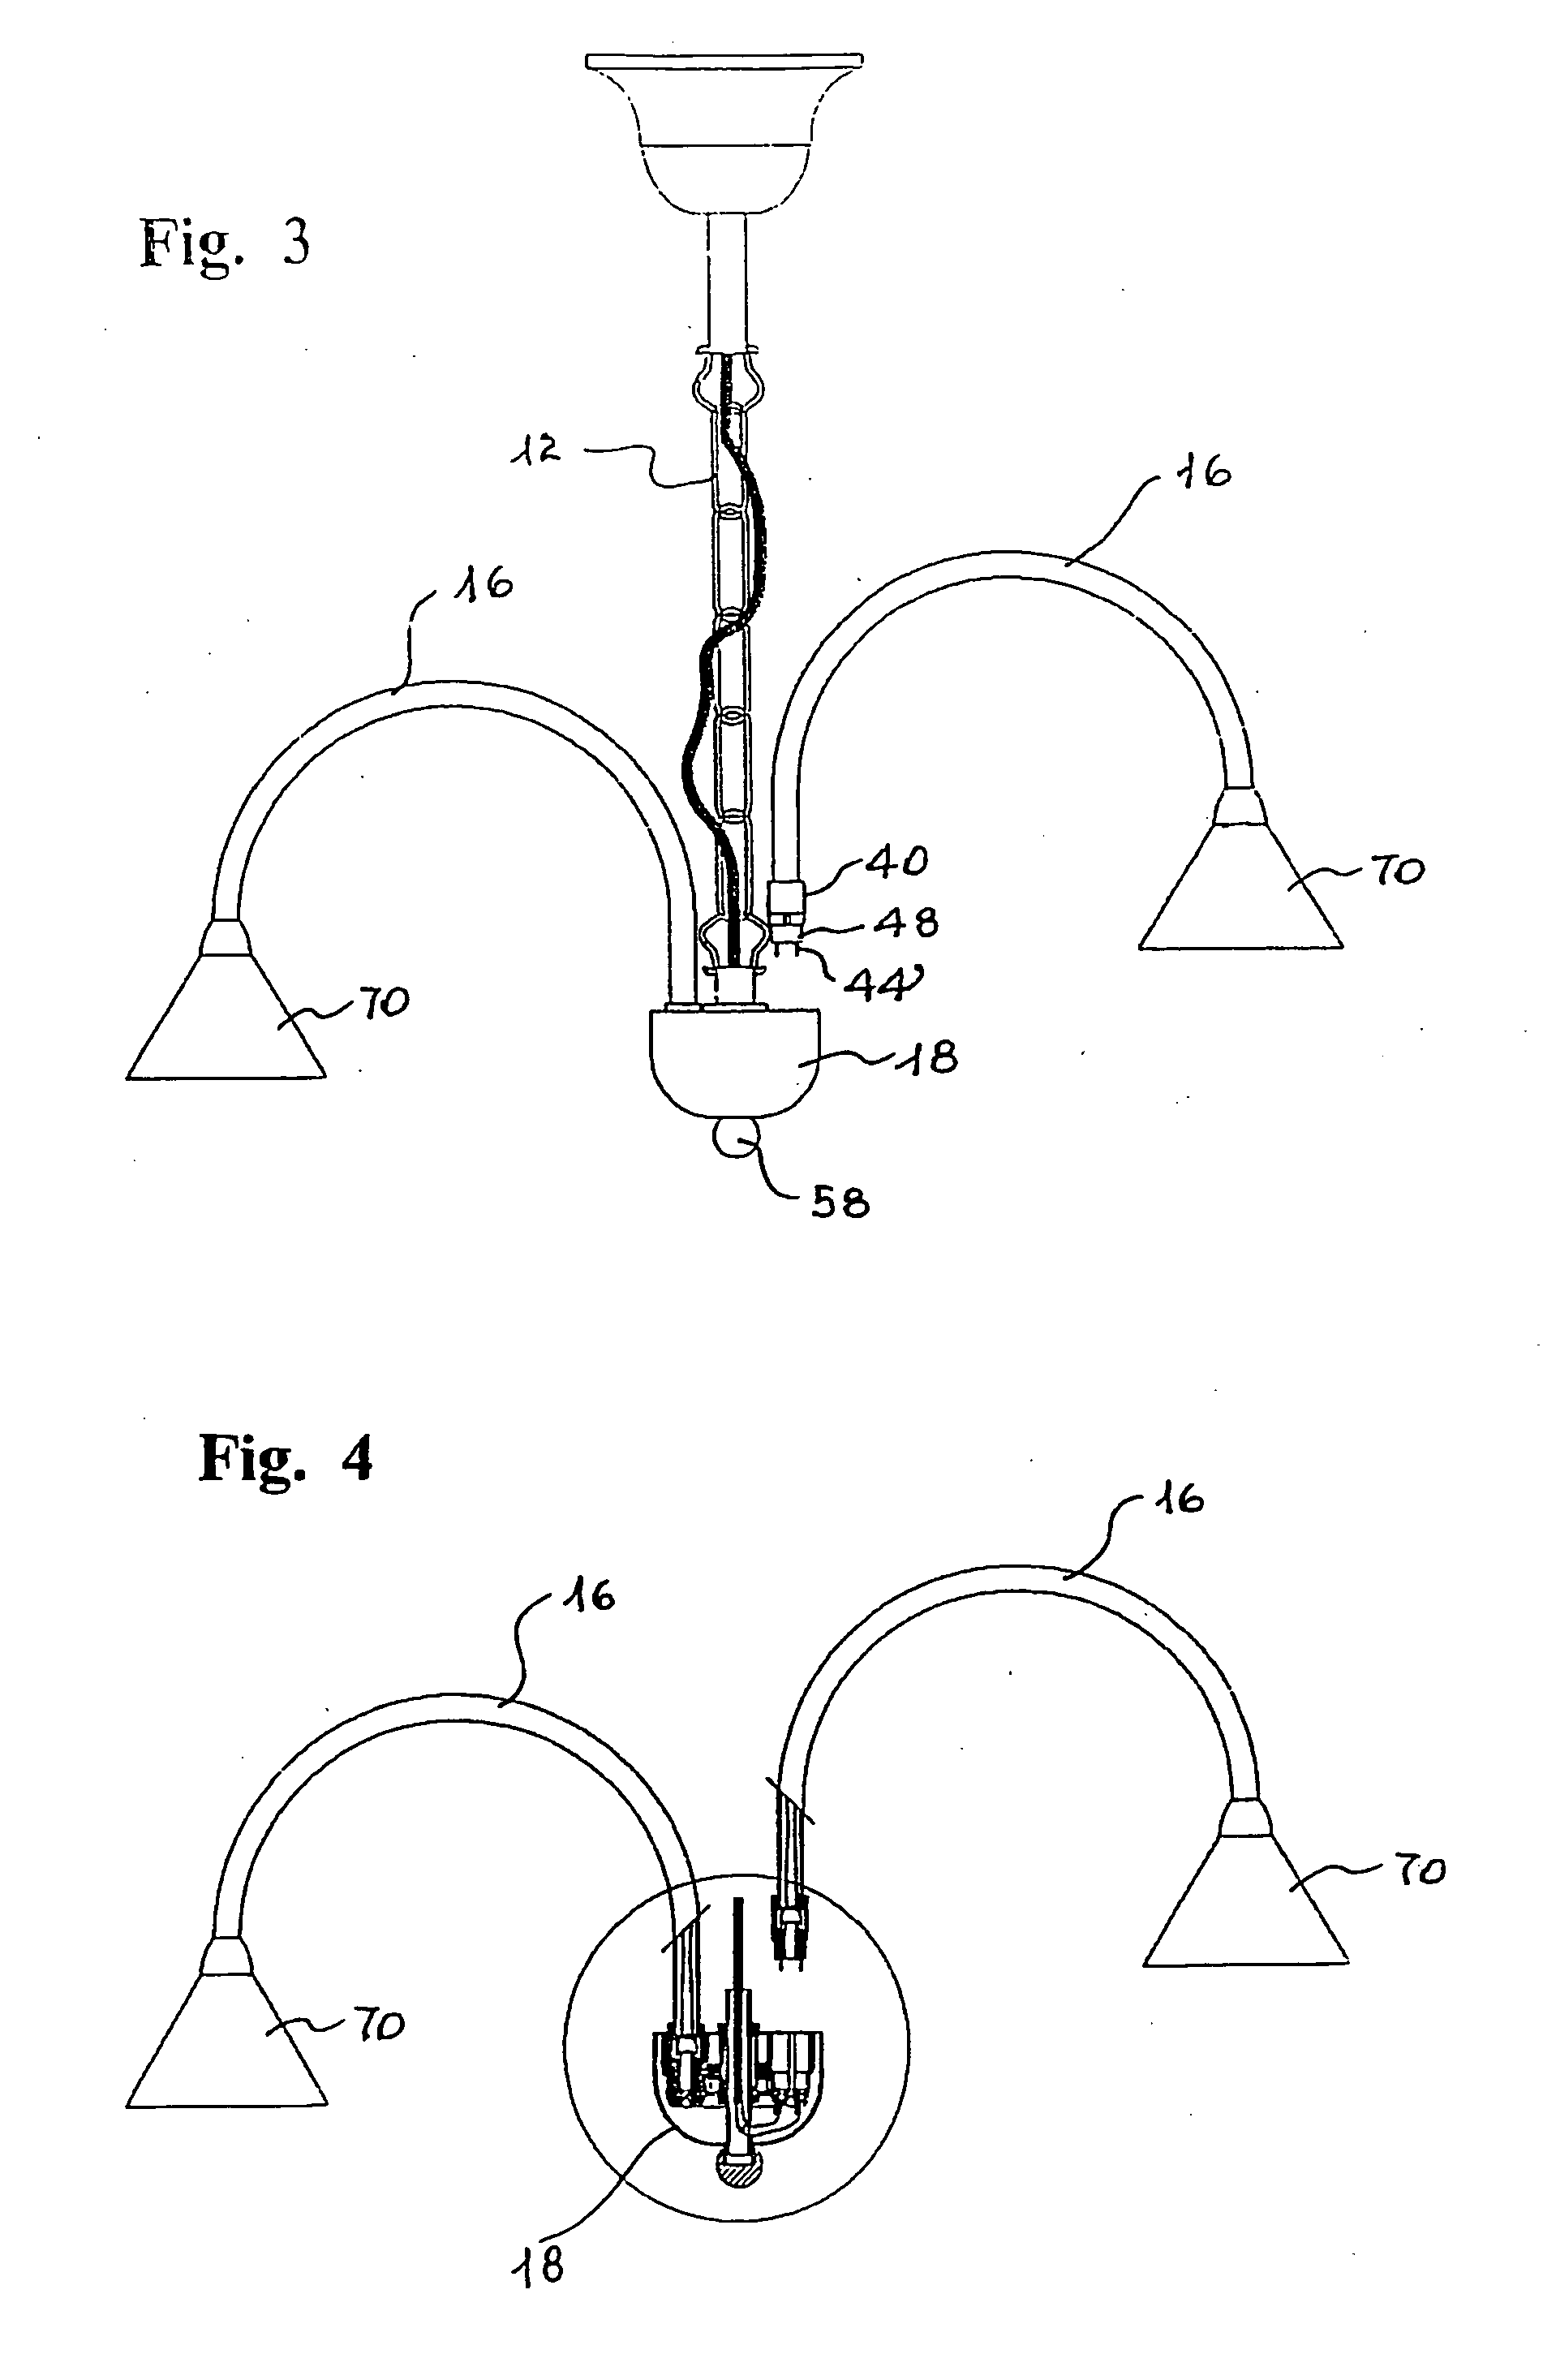 Modular lighting fixture with improved device for connecting the arms to the respective support